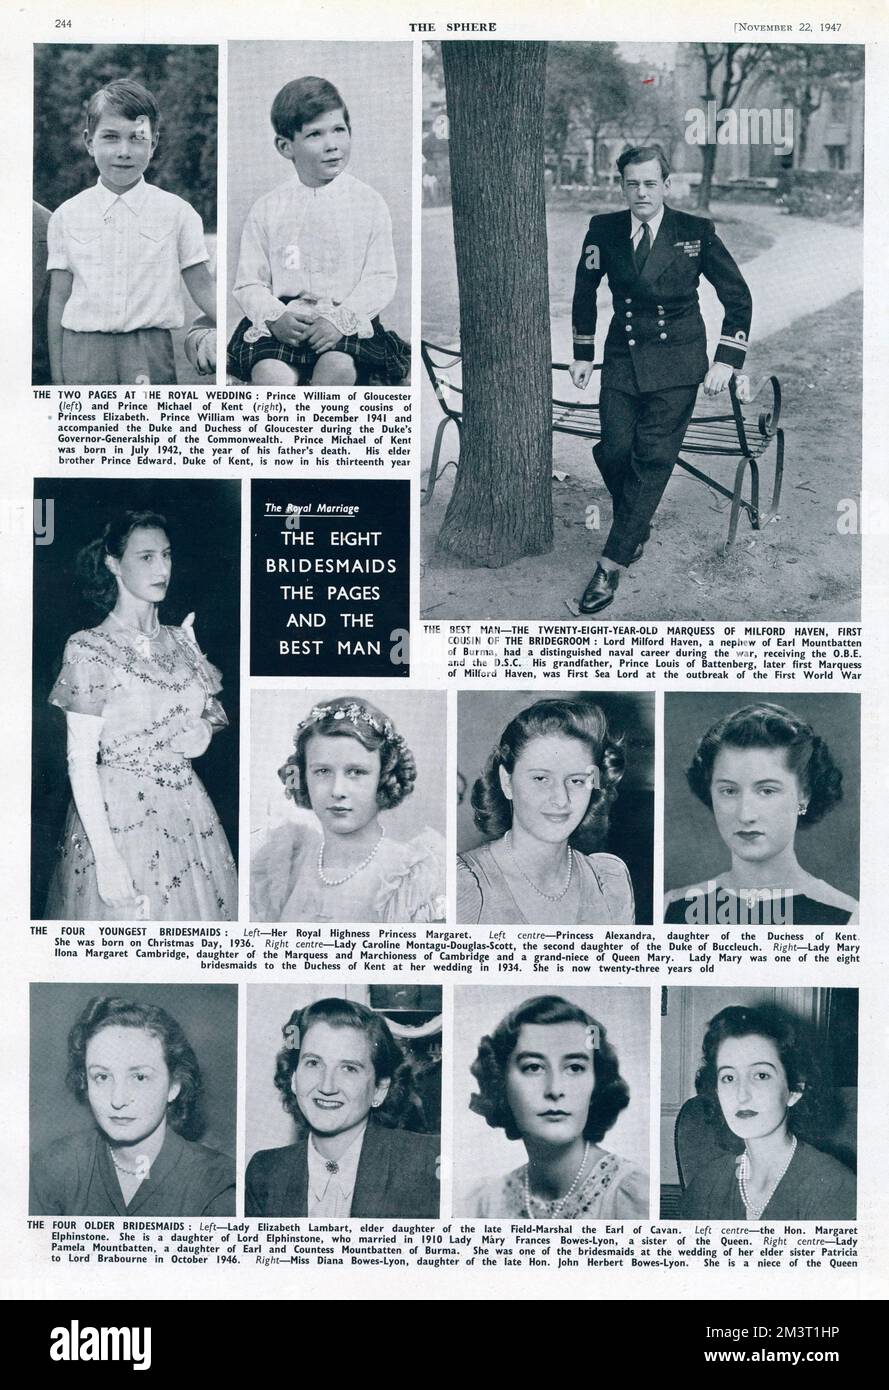 Page from The Sphere featuring photographs of the best man, bridesmaids and page boys at the wedding of Princess Elizabeth to Lieutenant Philip Mountbatten in November 1947. David, Marquess of Milford Haven was best man while Prince William of Gloucester and Prince Michael of Kent were page boys. Bridesmaids were Princess Margaret, Princess Alexandra, Caroline Montagu-Douglas-Scott, Lady Mary Cambridge, Lady Elizabeth Lambert, Hon, Margaret Elphinstone, Lady Pamela Mountbatten and Diana Bowes Lyon. Stock Photo